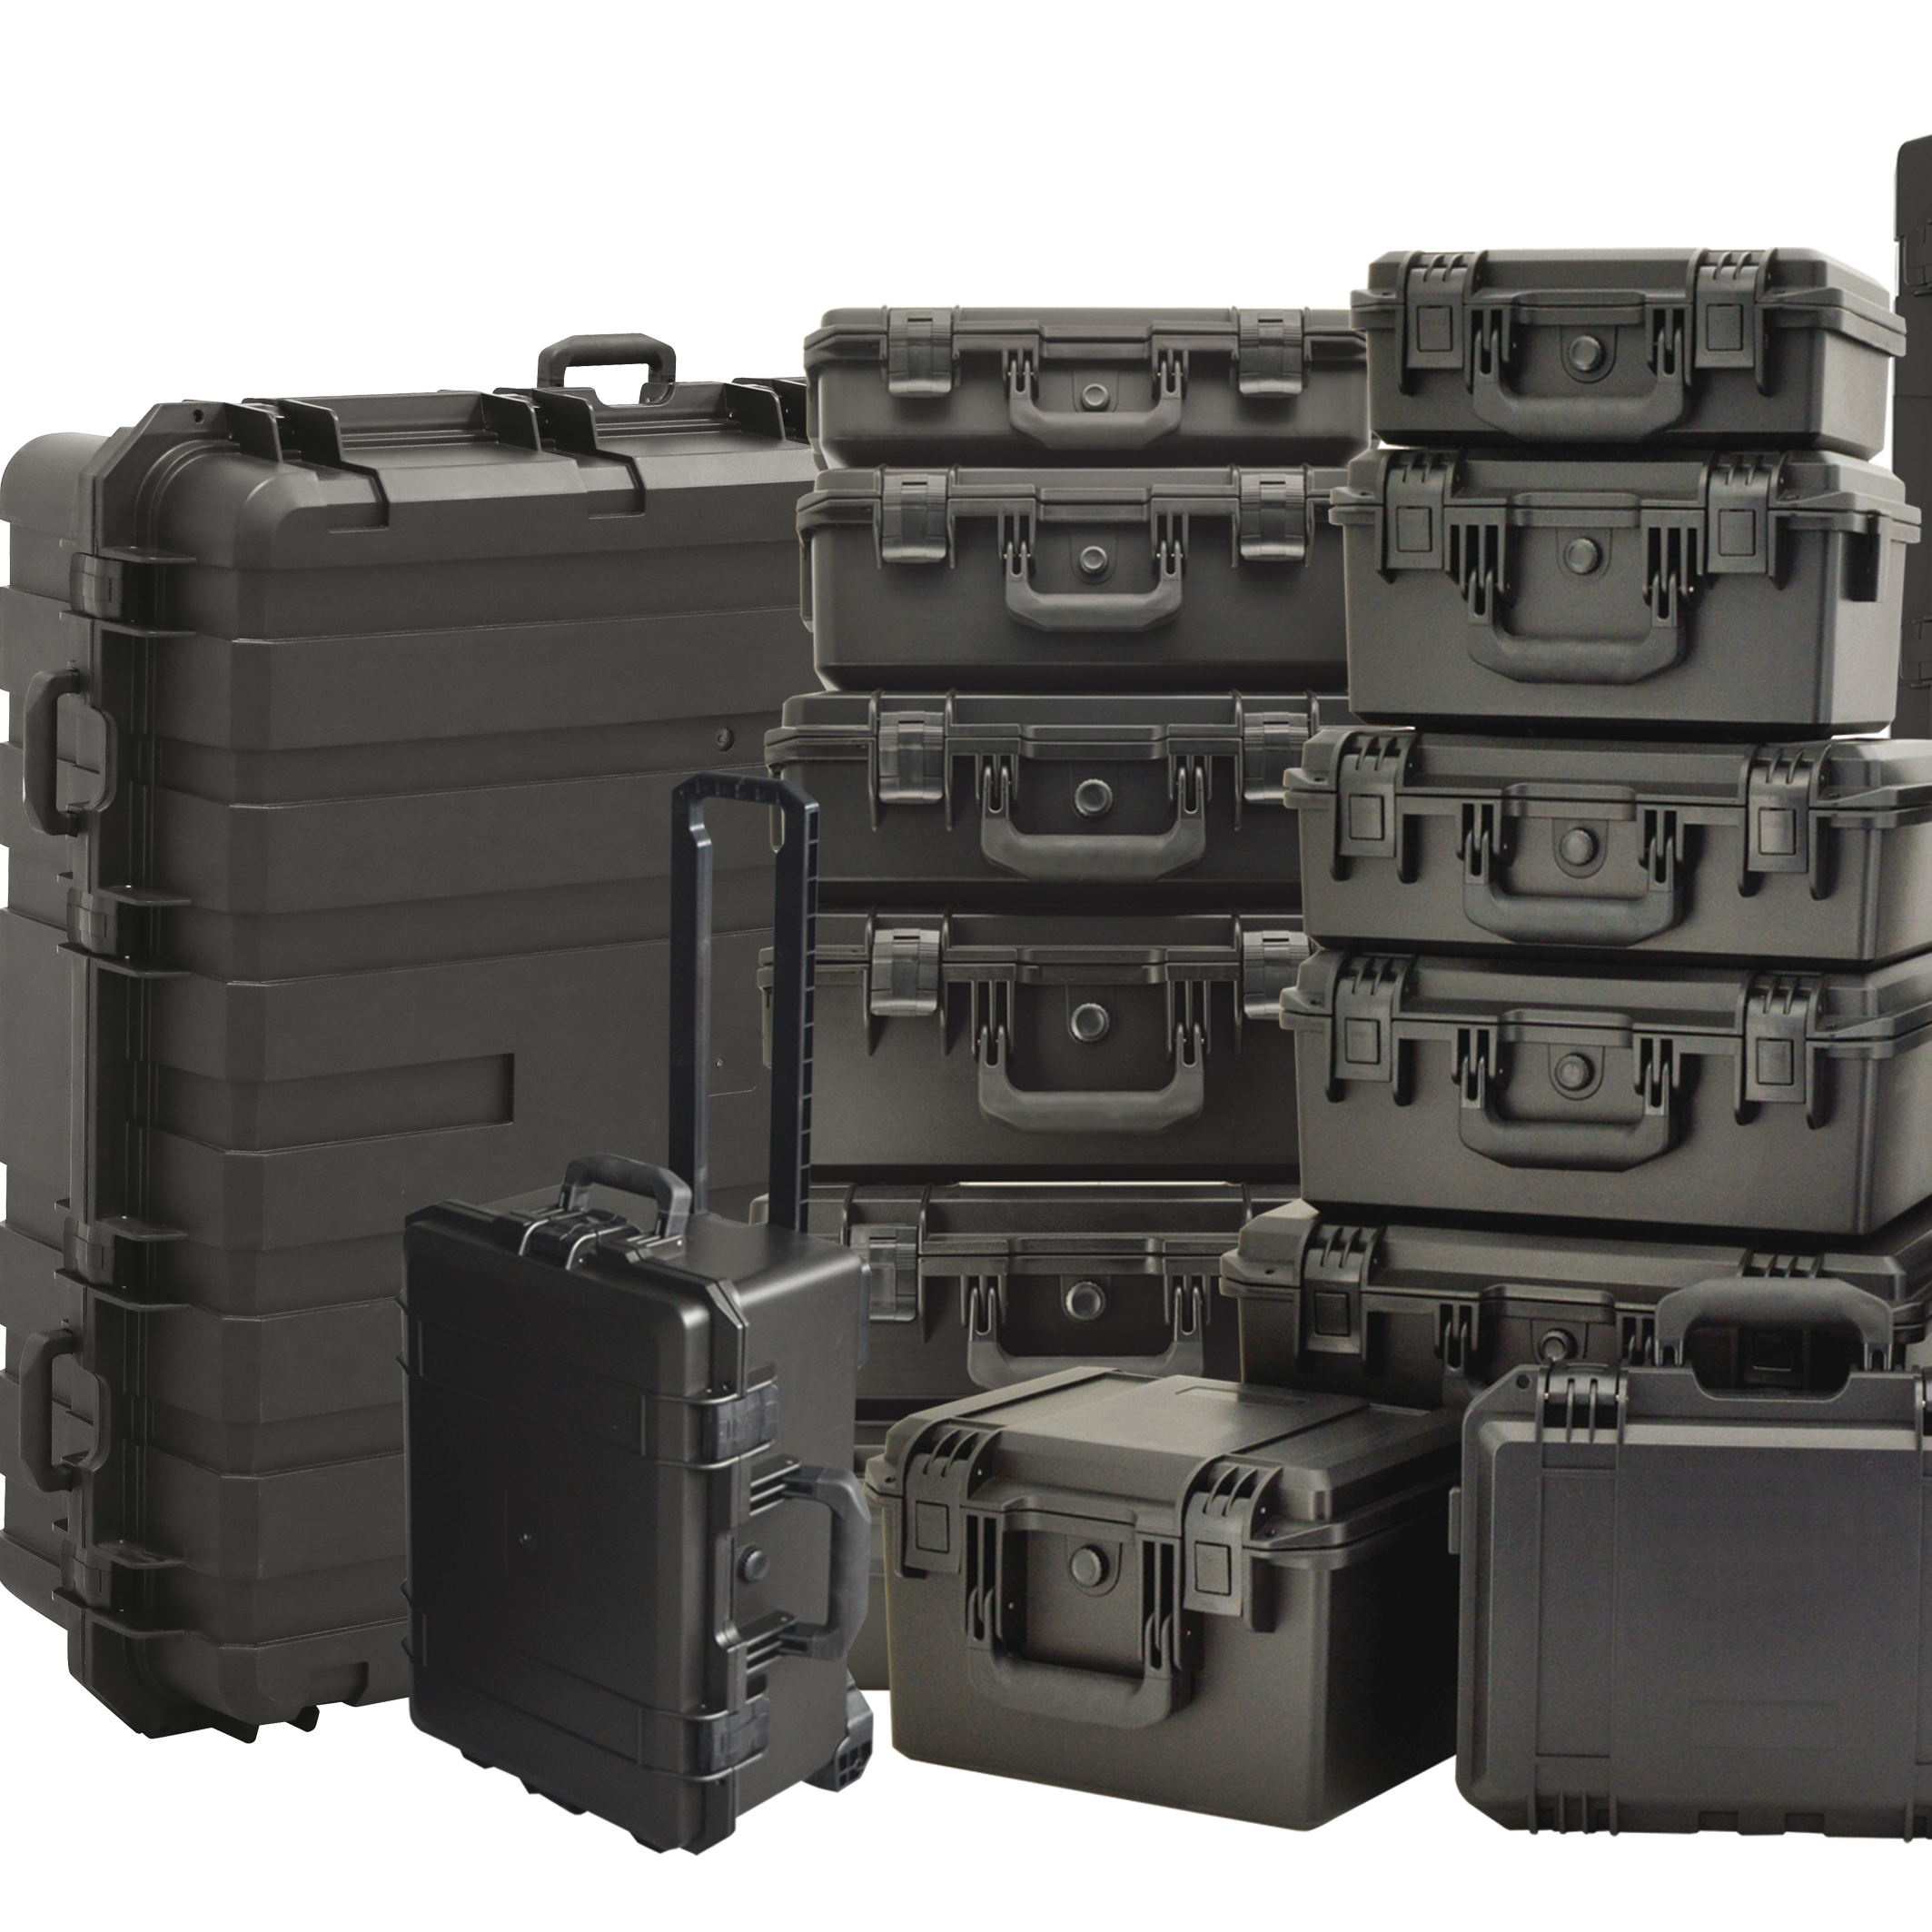 Securing Your Gear: The Essential Guide to Tool Cases, Carrying Cases, and Plastic Gun Cases